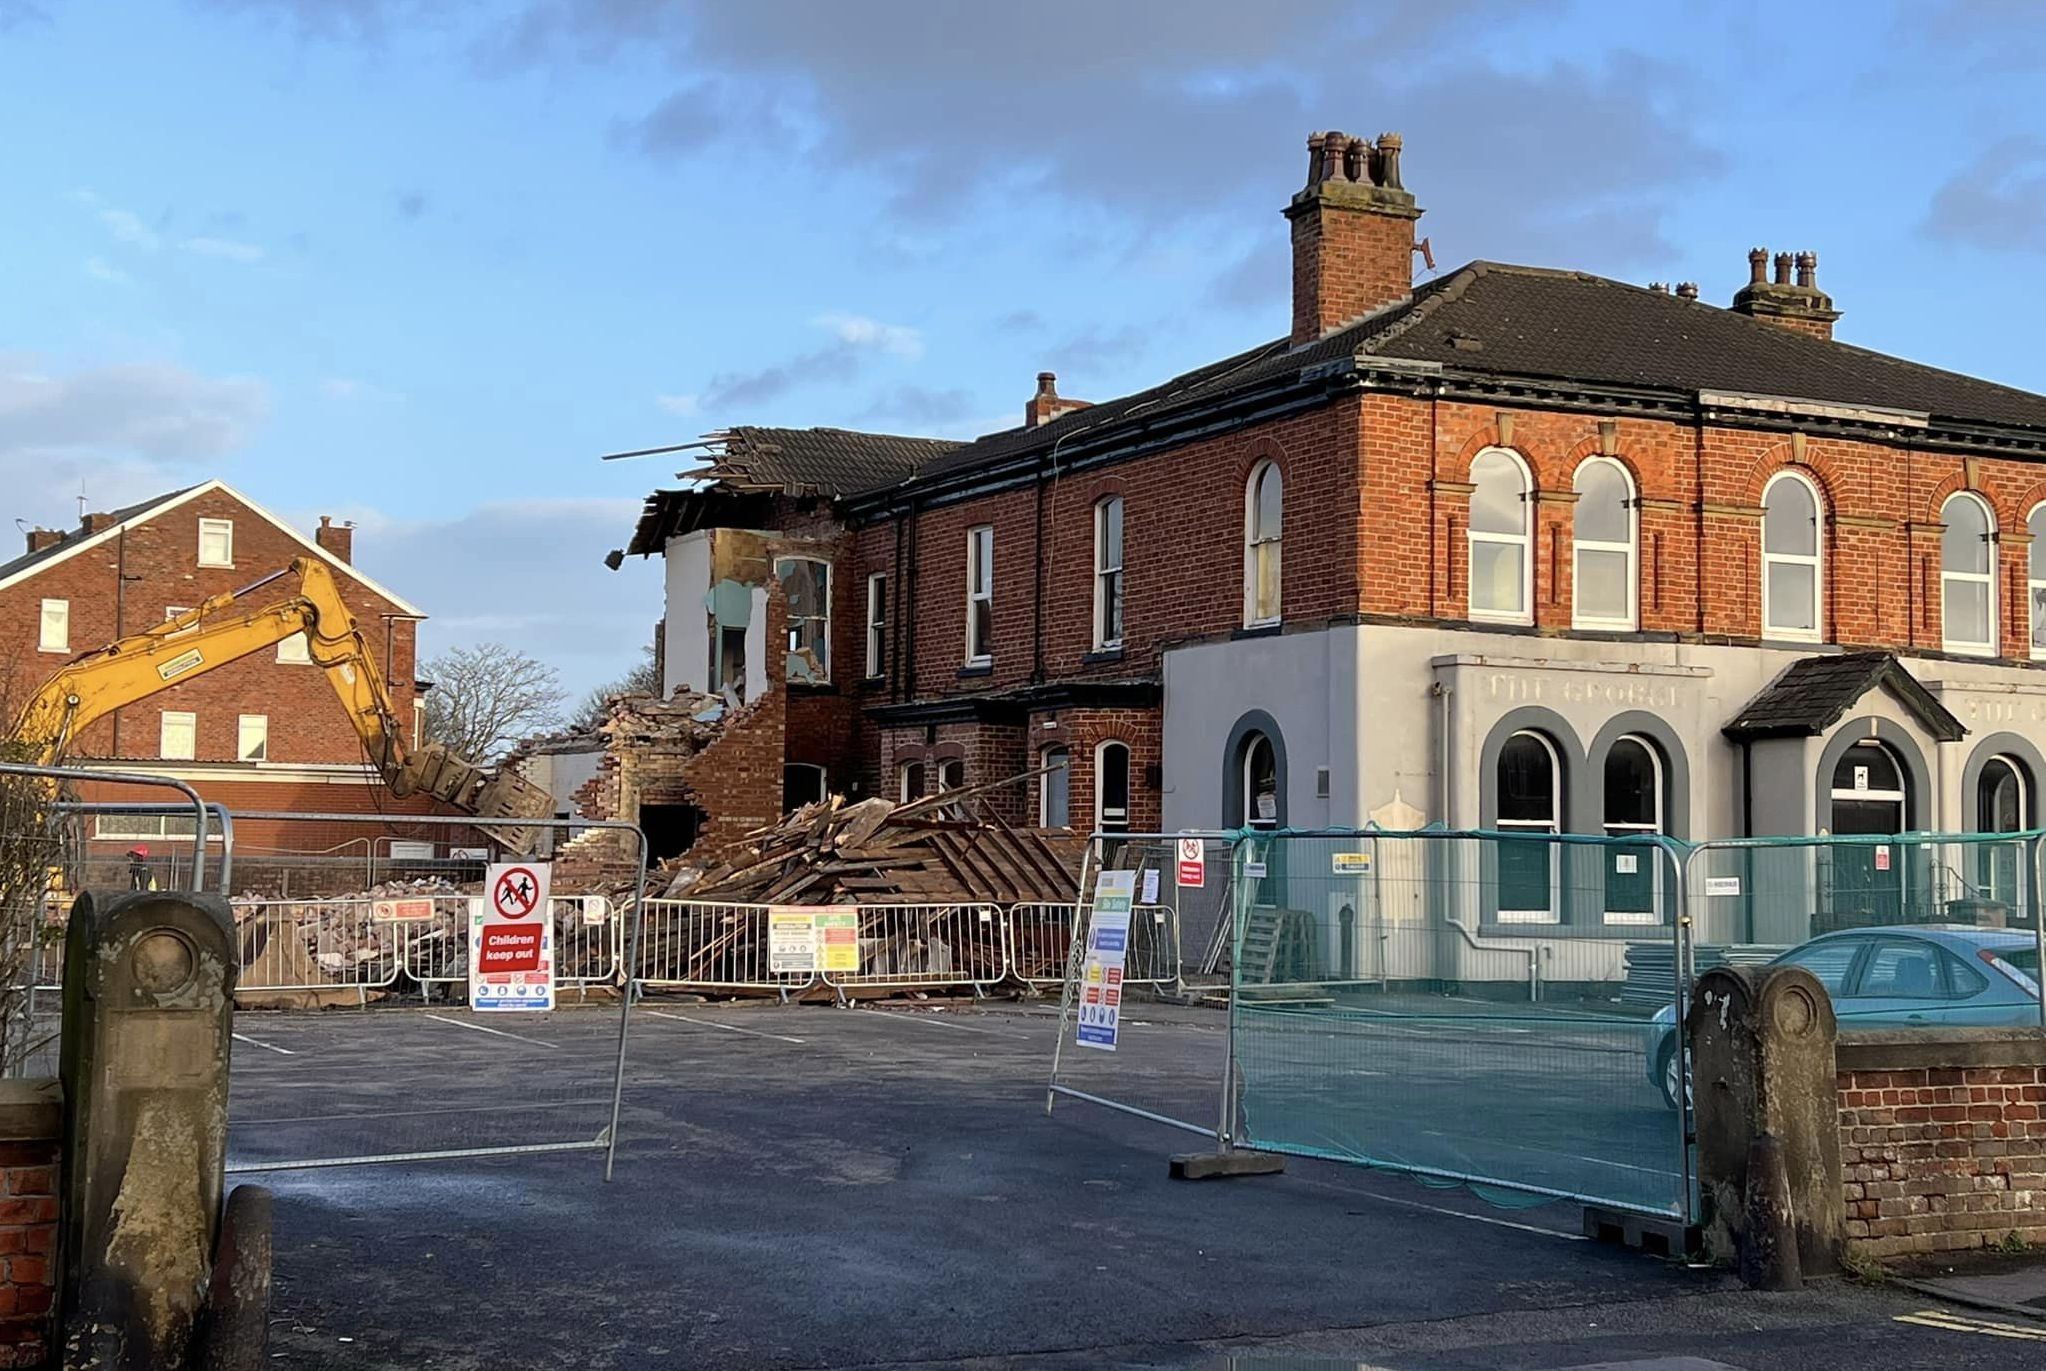 Work takes place to demolish The George pub in Southport and replace it with a new Co-Op convenience store. Photo by Martin Rowe